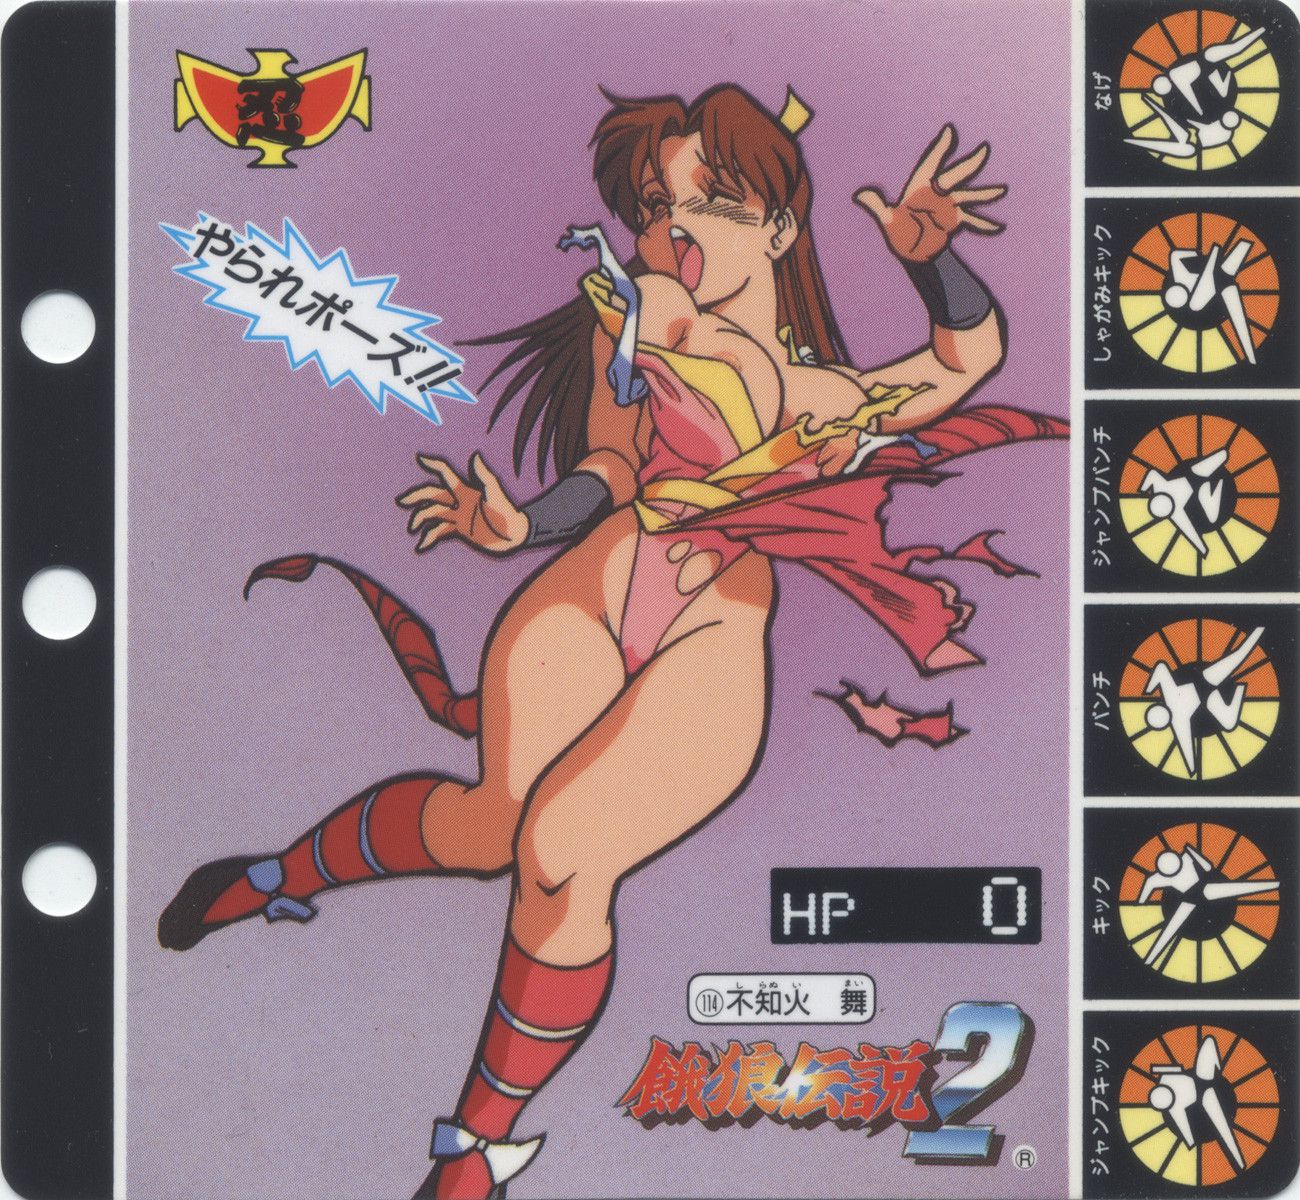 [Image] said Mai Shiranui rated game ever on the best erotic character wwwwwwww 9